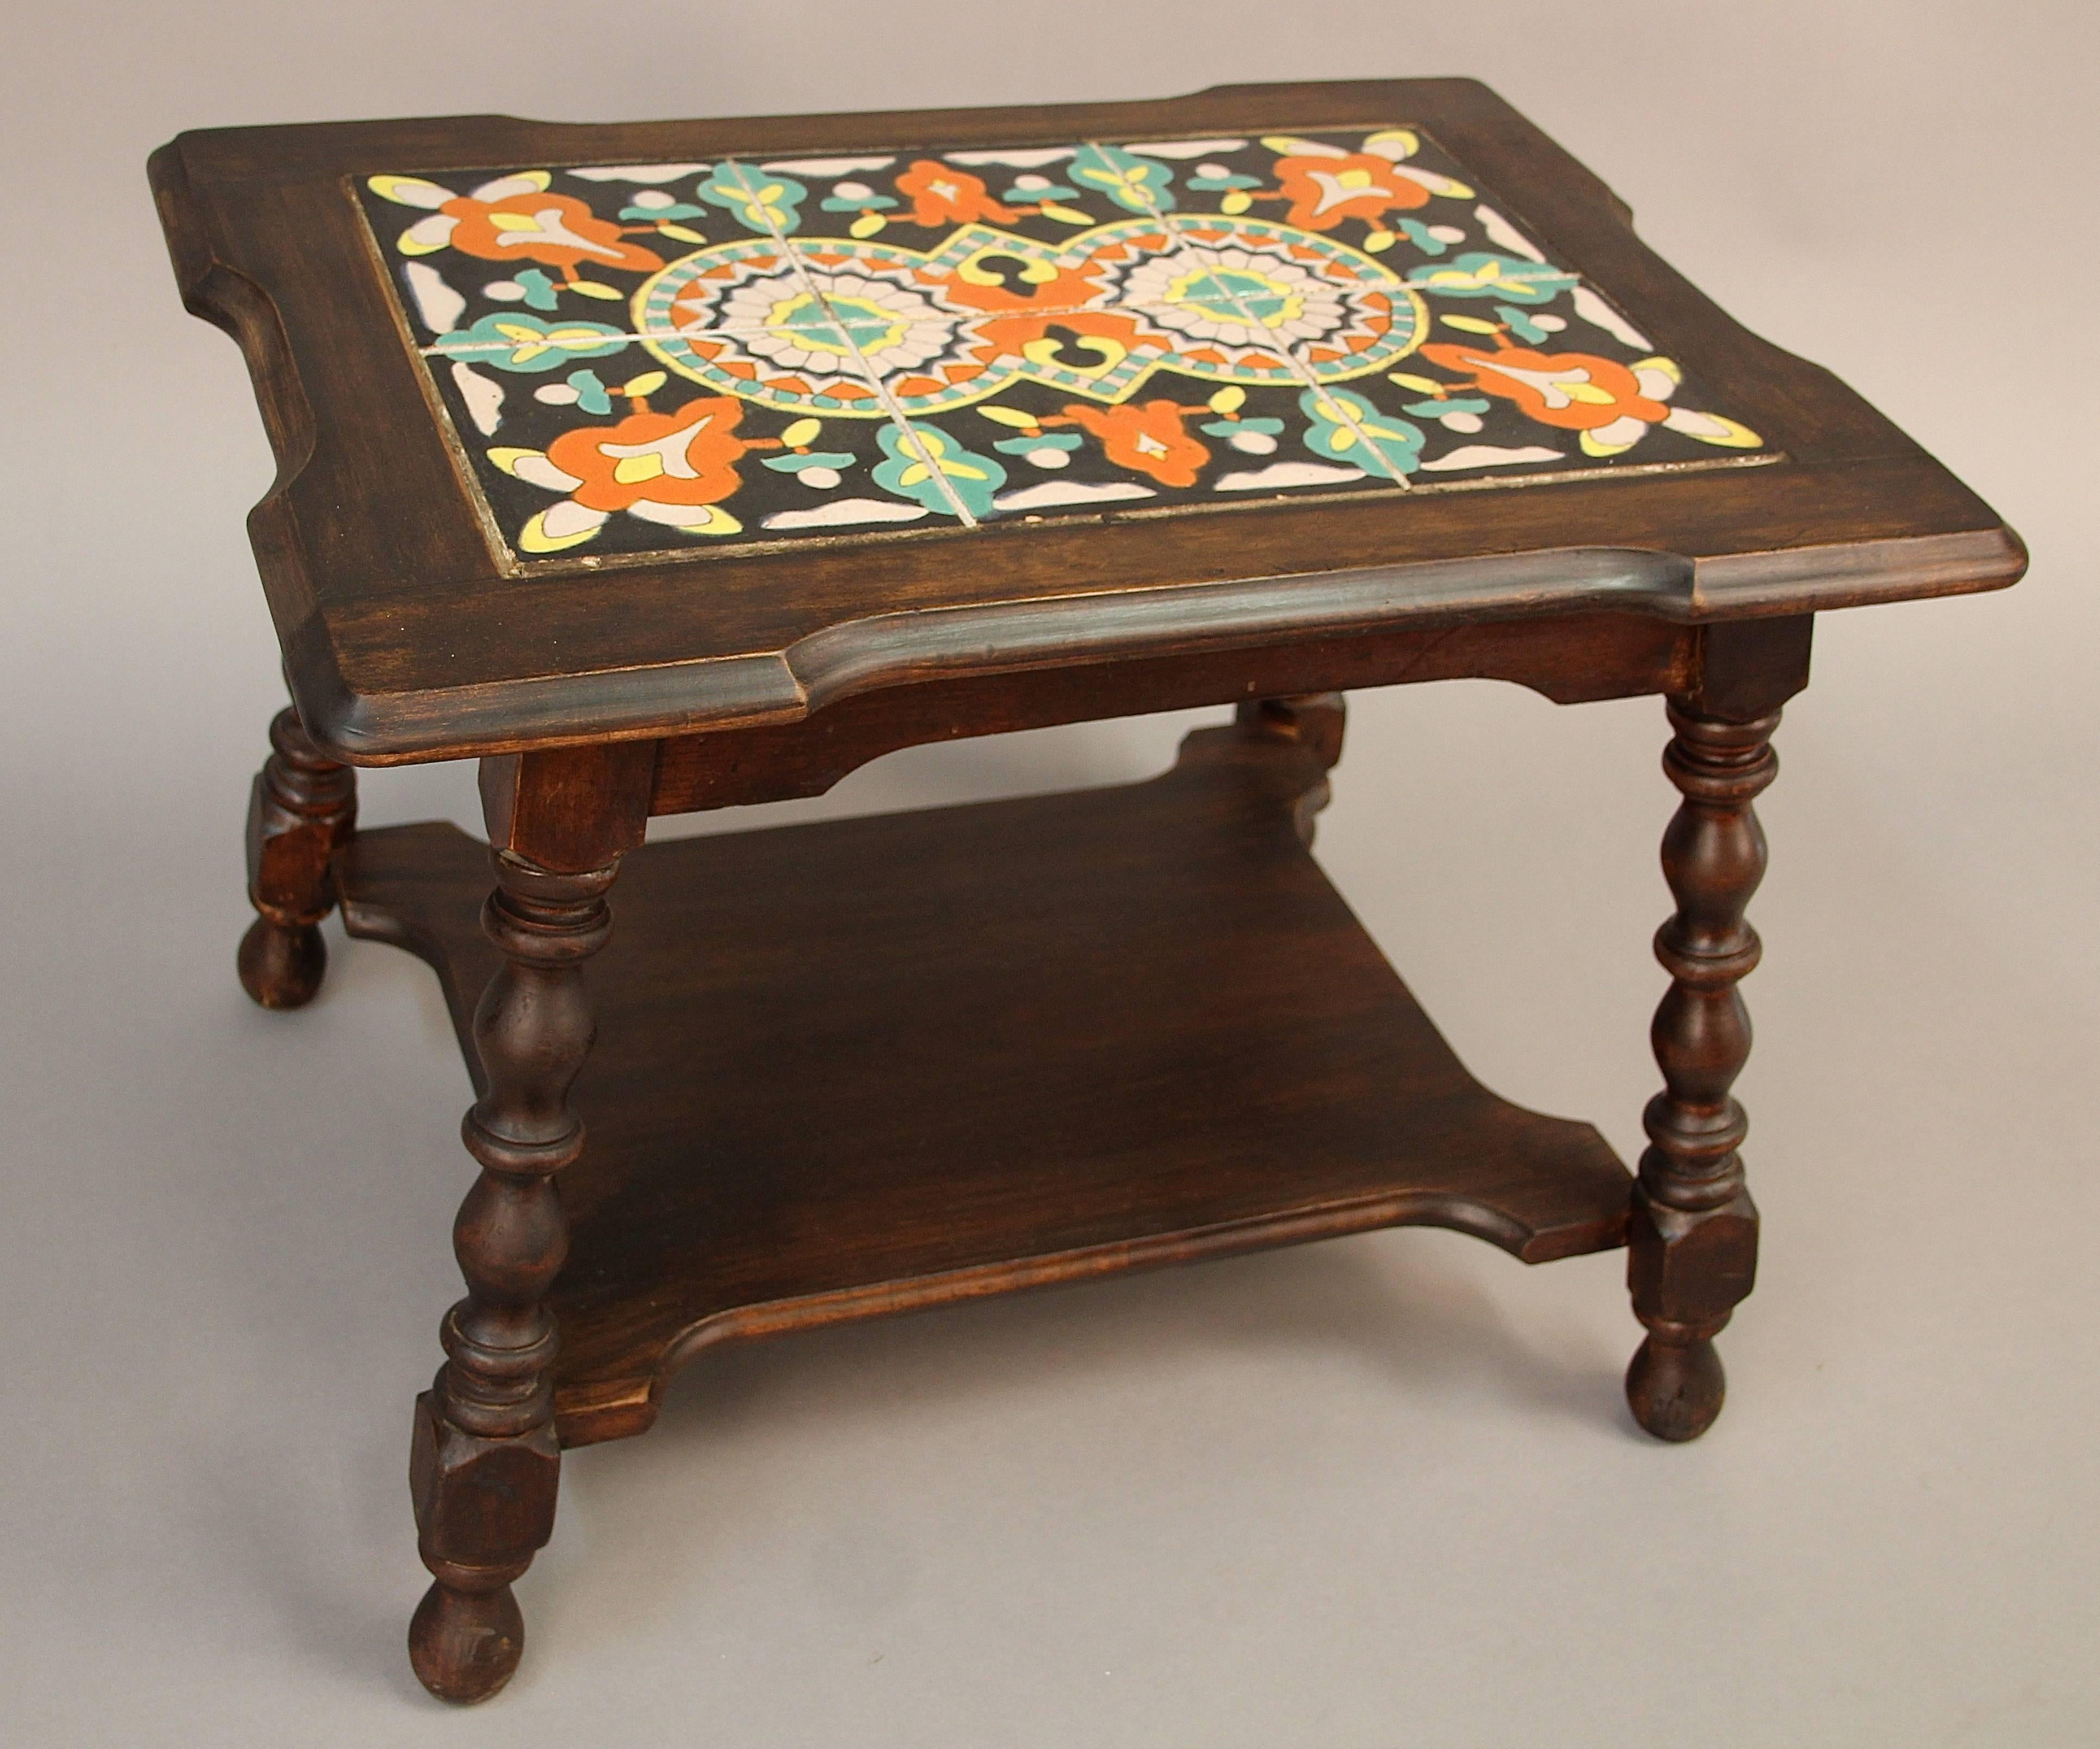 California tile table with turned legs and with additional display shelf on the bottom. Unusual shape with the cut-outs on the sides.